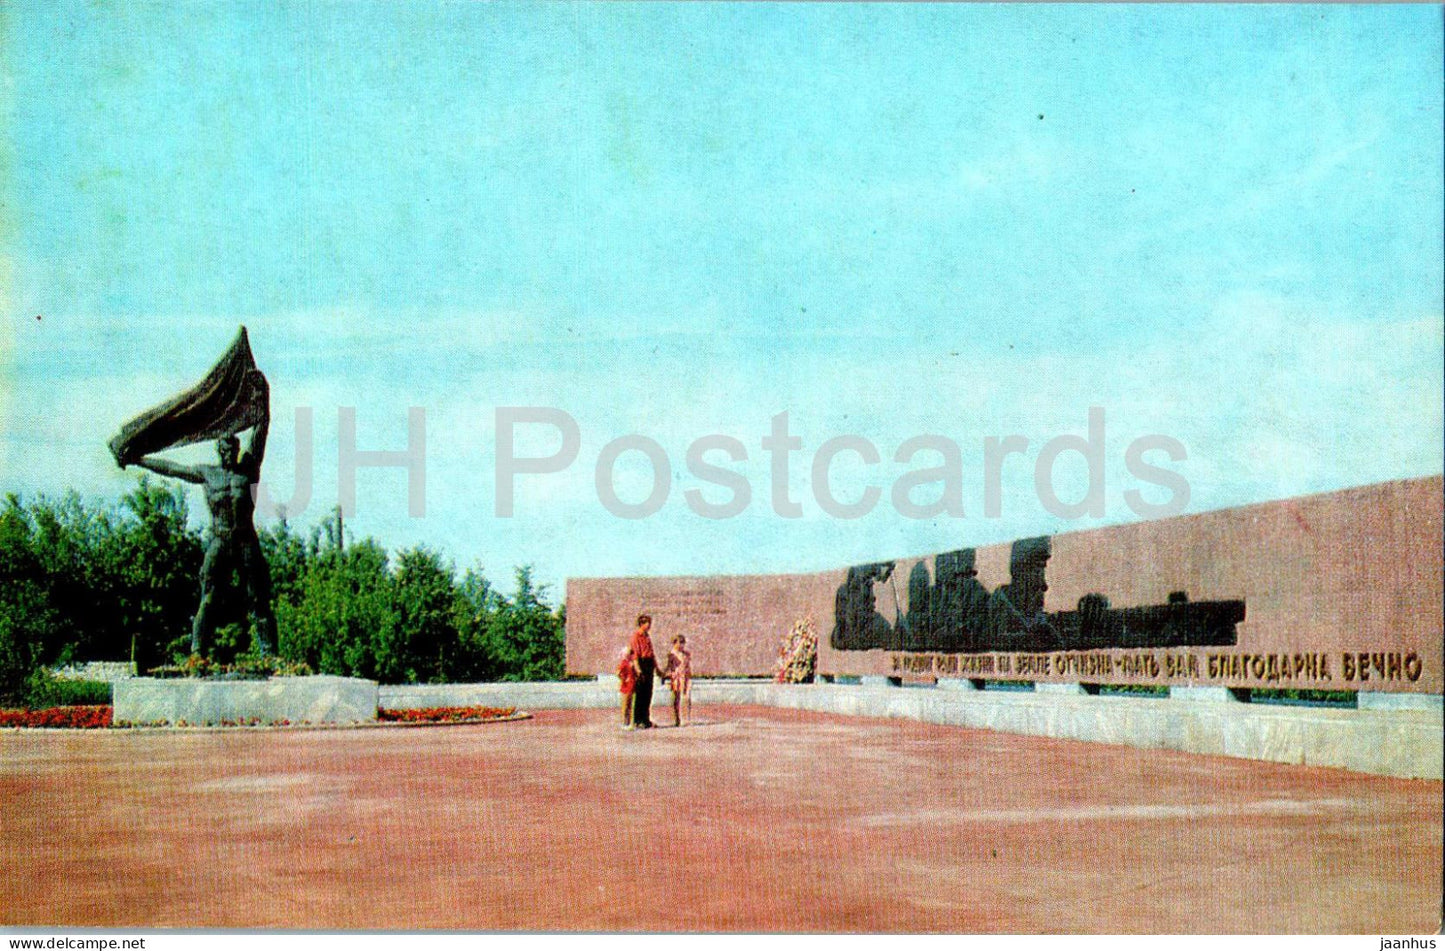 Izhevsk - Monument of military and labor glory - 1978 - Udmurtia - Russia USSR - unused - JH Postcards